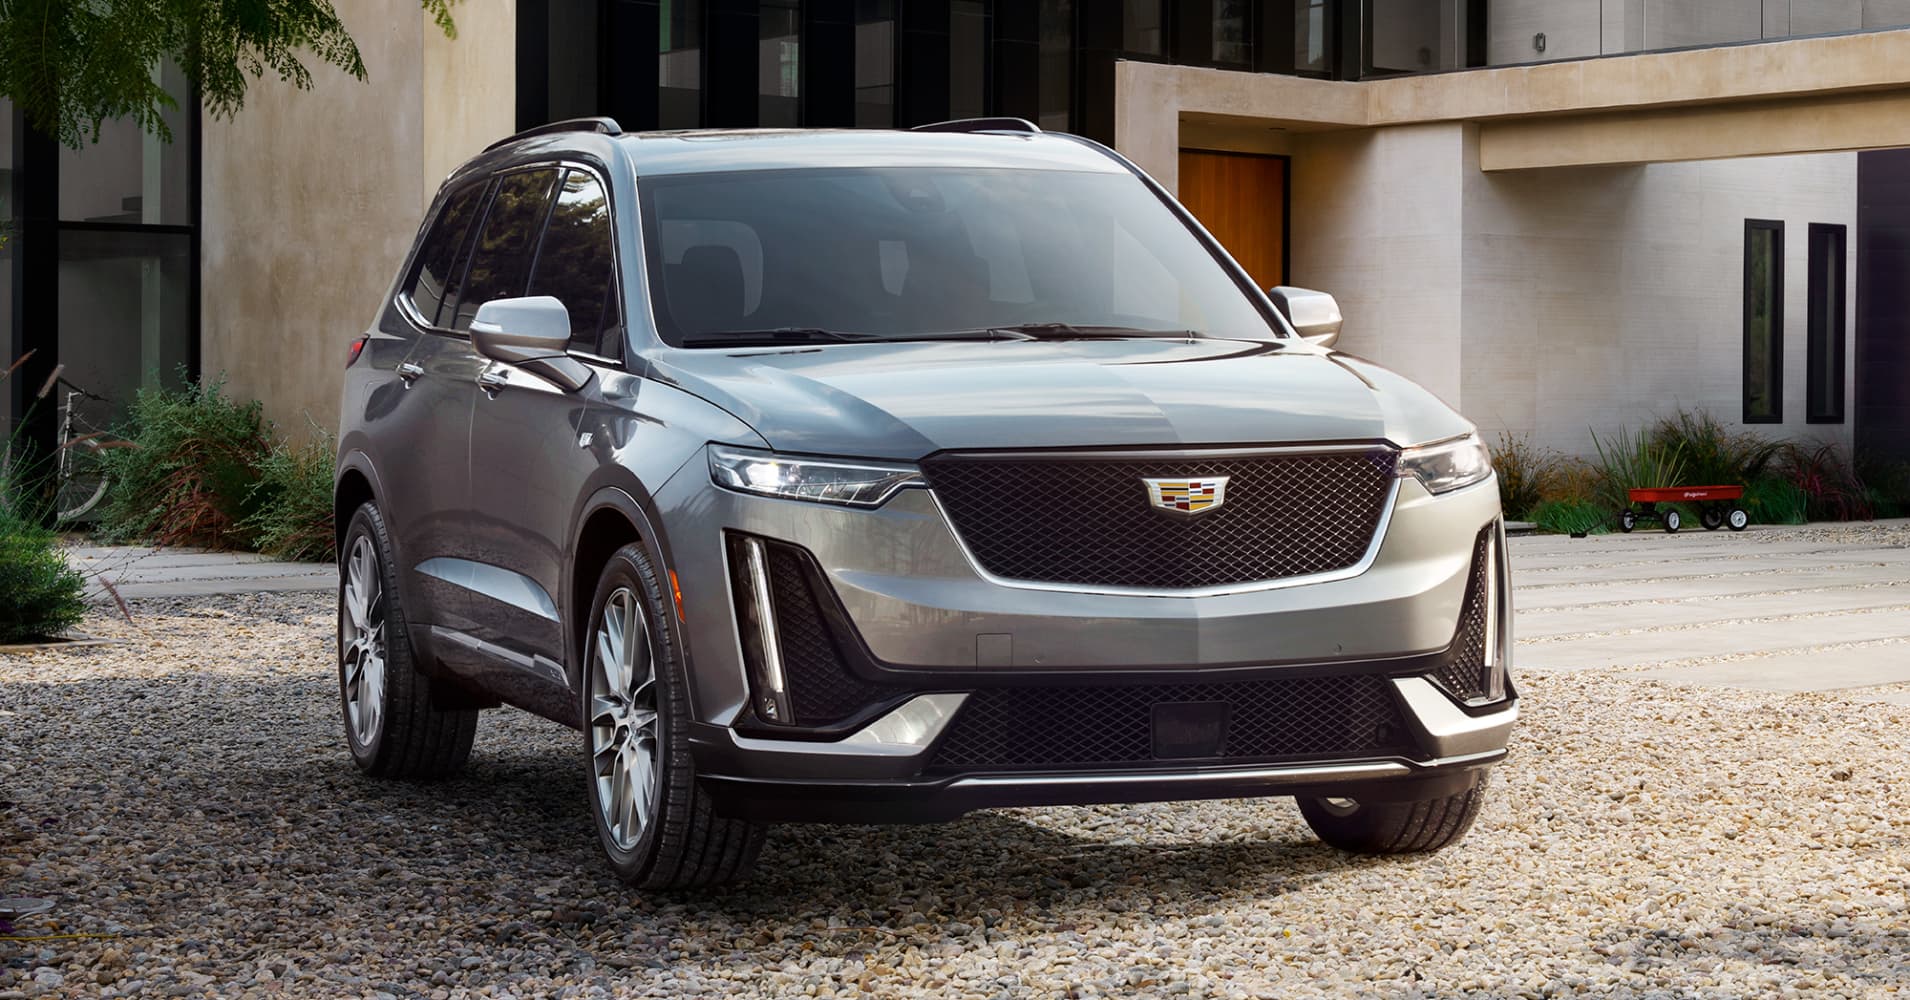 Cadillac debuts 3-row crossover XT6 to lure luxury buyers from rivals